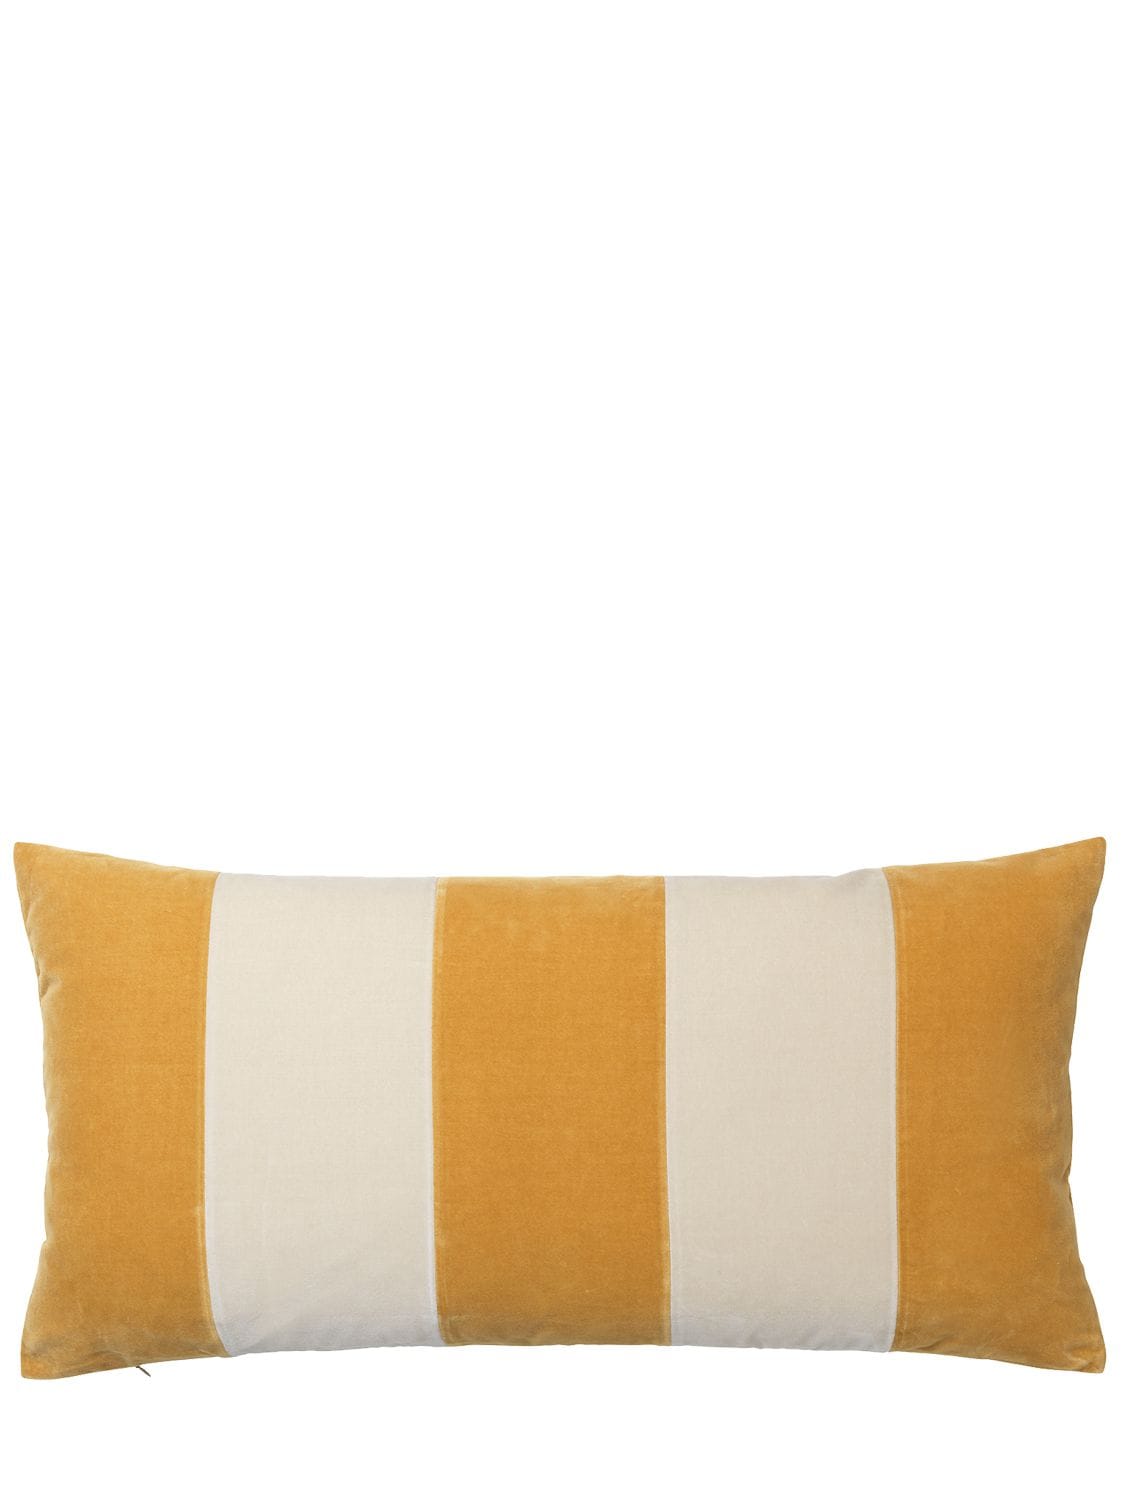 Christina Lundsteen Striped Velvet Cushion In Yellow,pink